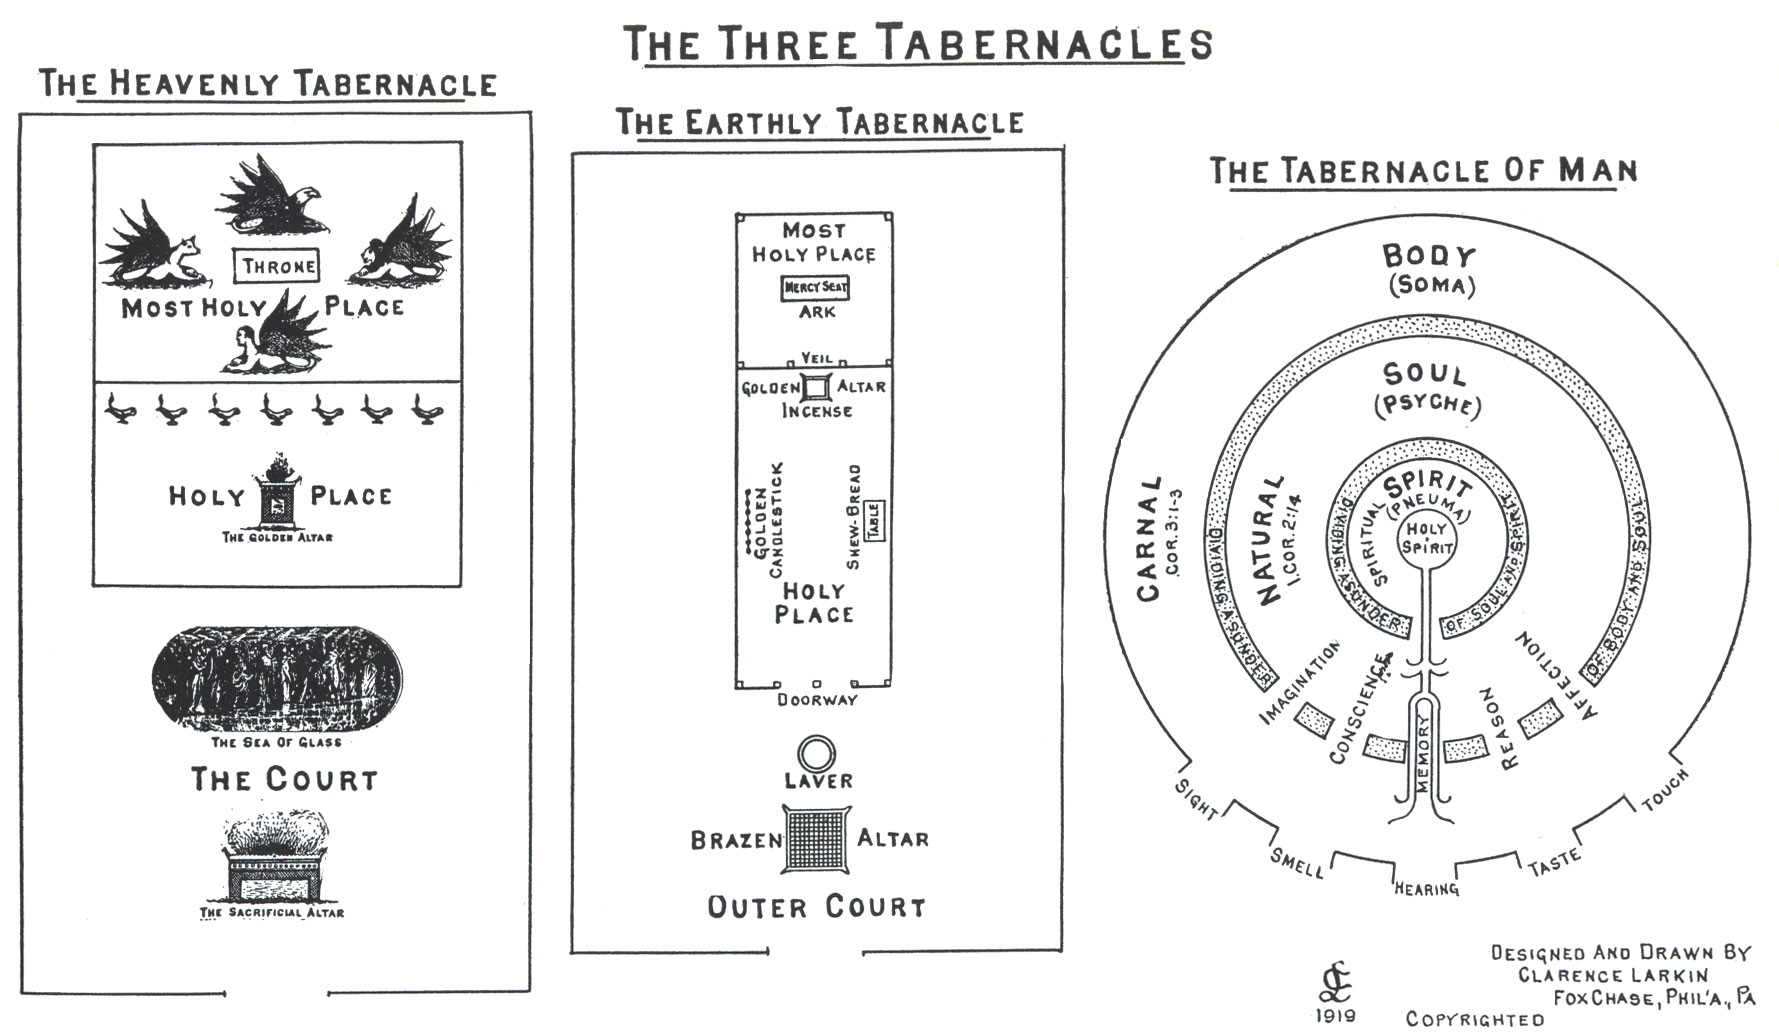 The Three Tabernacles Illustration by Clarence Larkin